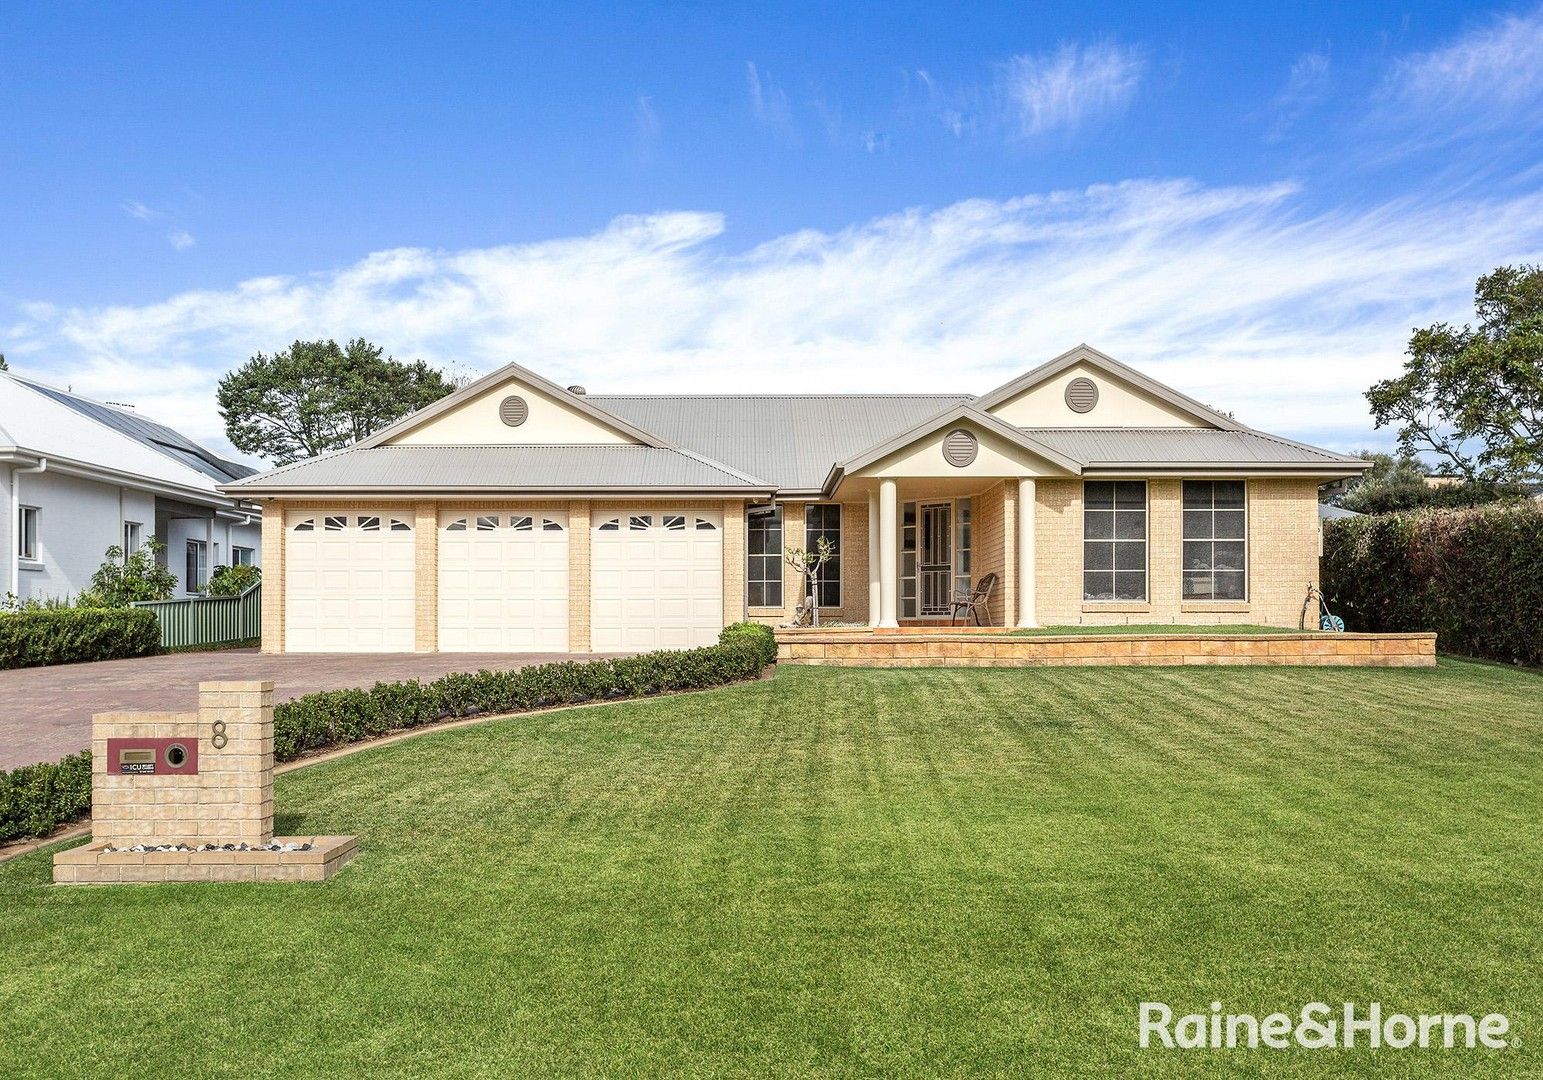 4 bedrooms House in 8 Appleberry Close BOMADERRY NSW, 2541